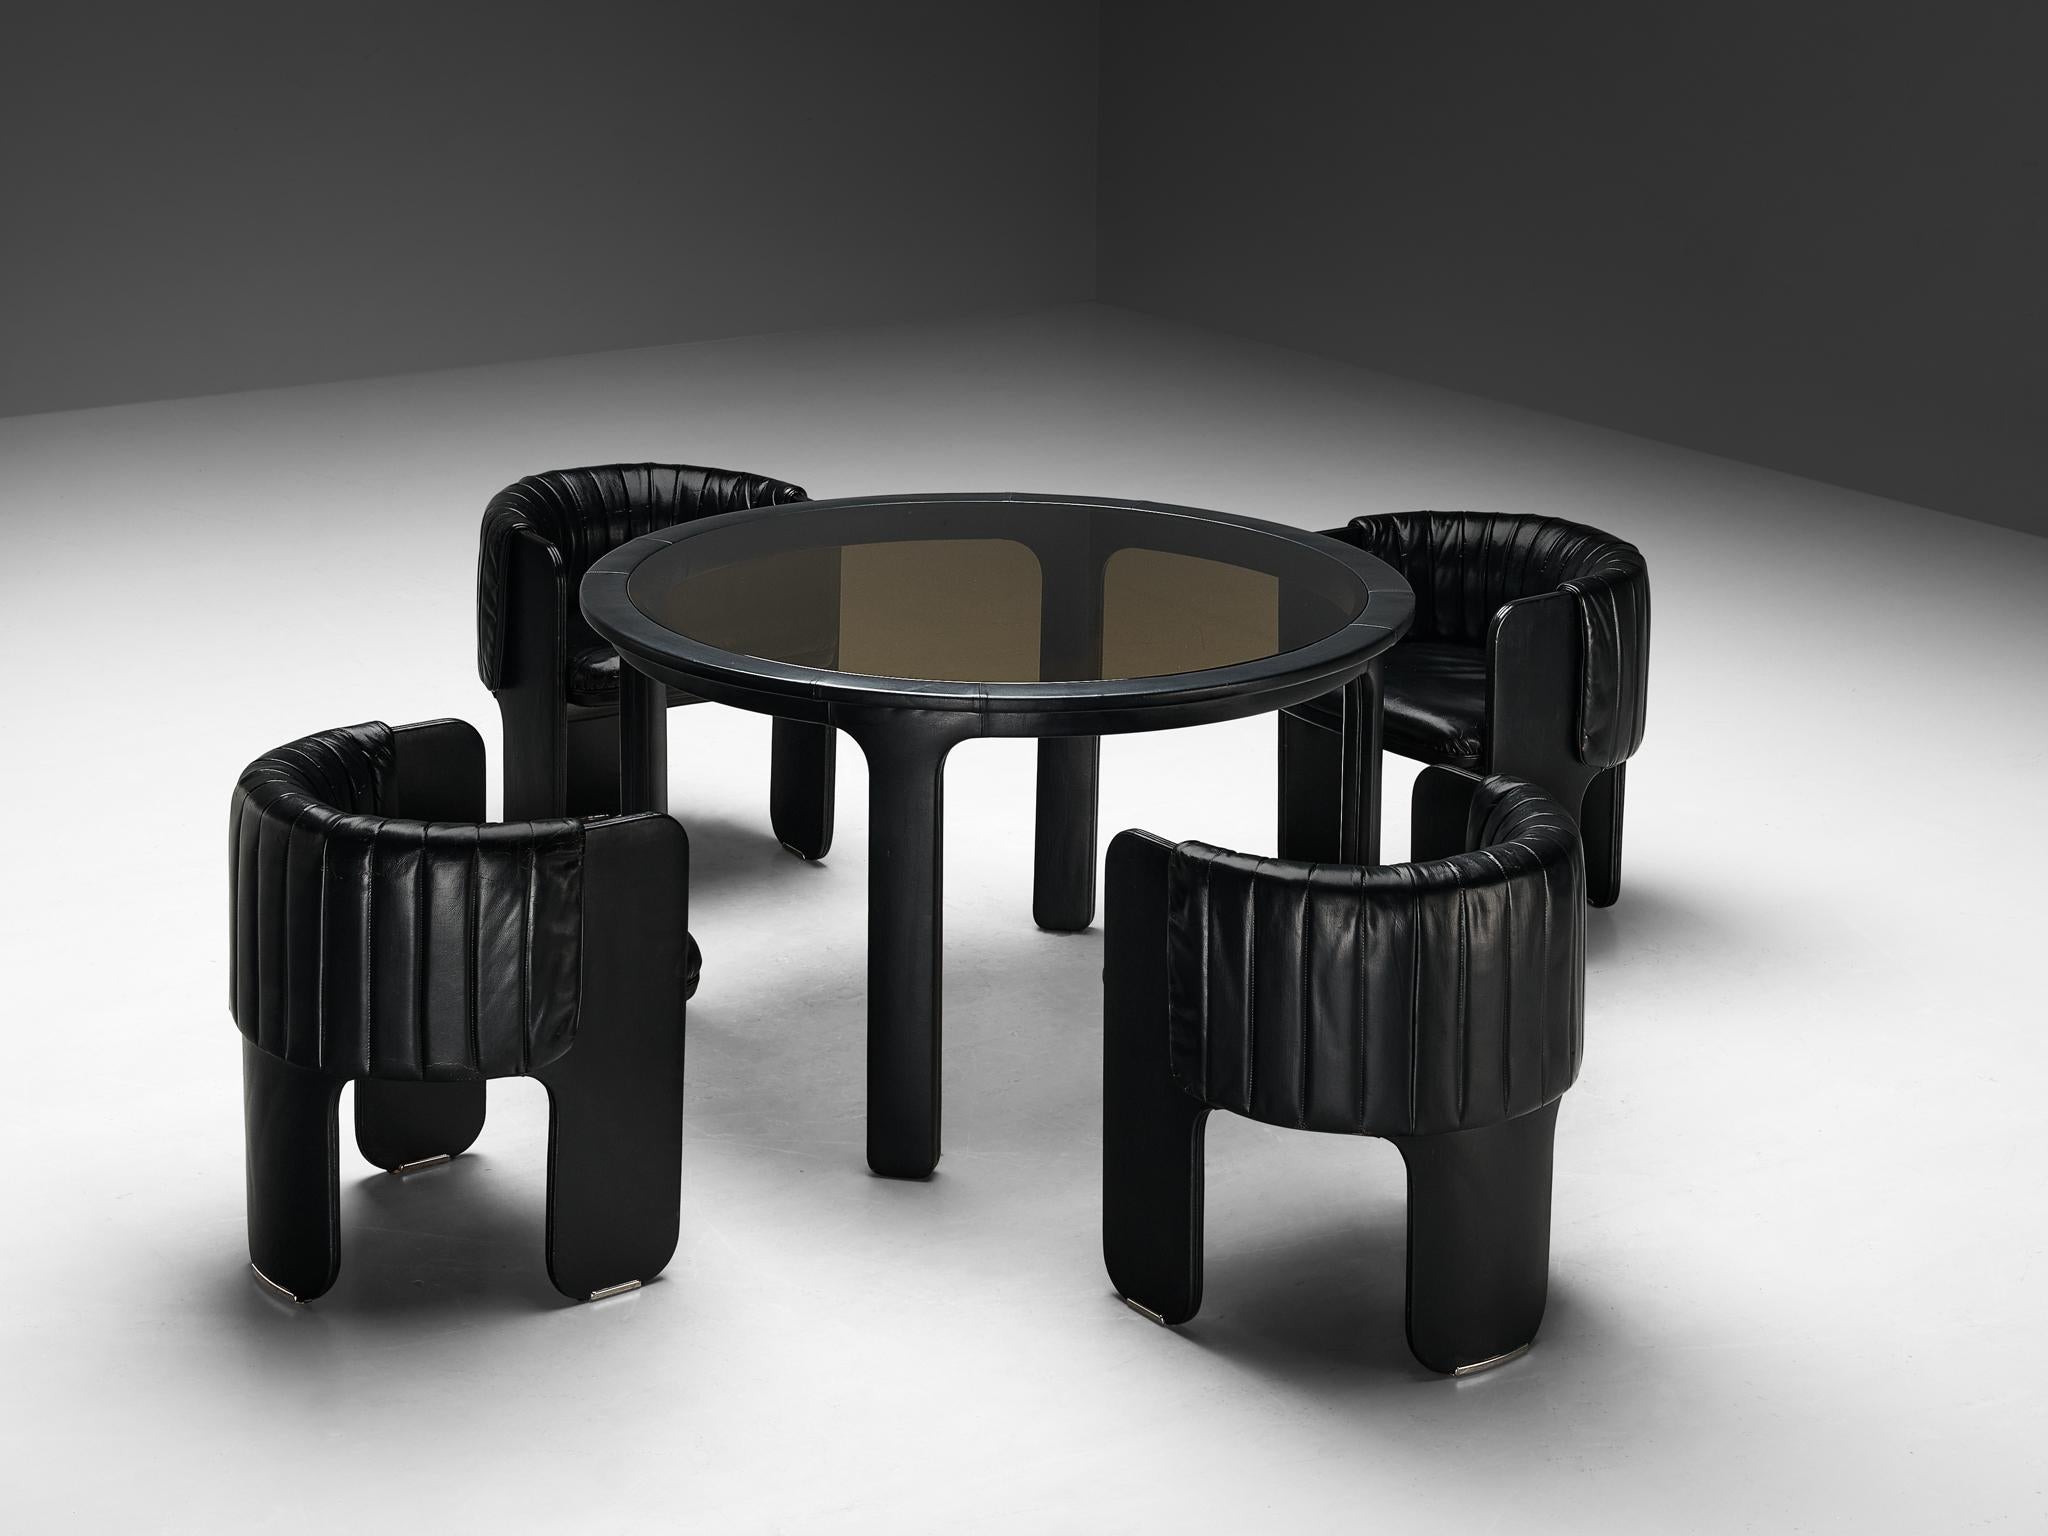 Luigi Massoni for Poltrona Frau, set of four armchairs with dining table, model ‘Dinette’, leather, chrome, glass, Italy, 1972

A striking ensemble consisting of four Dinette chairs paired with a dining table, designed by Luigi Massoni for Poltrona